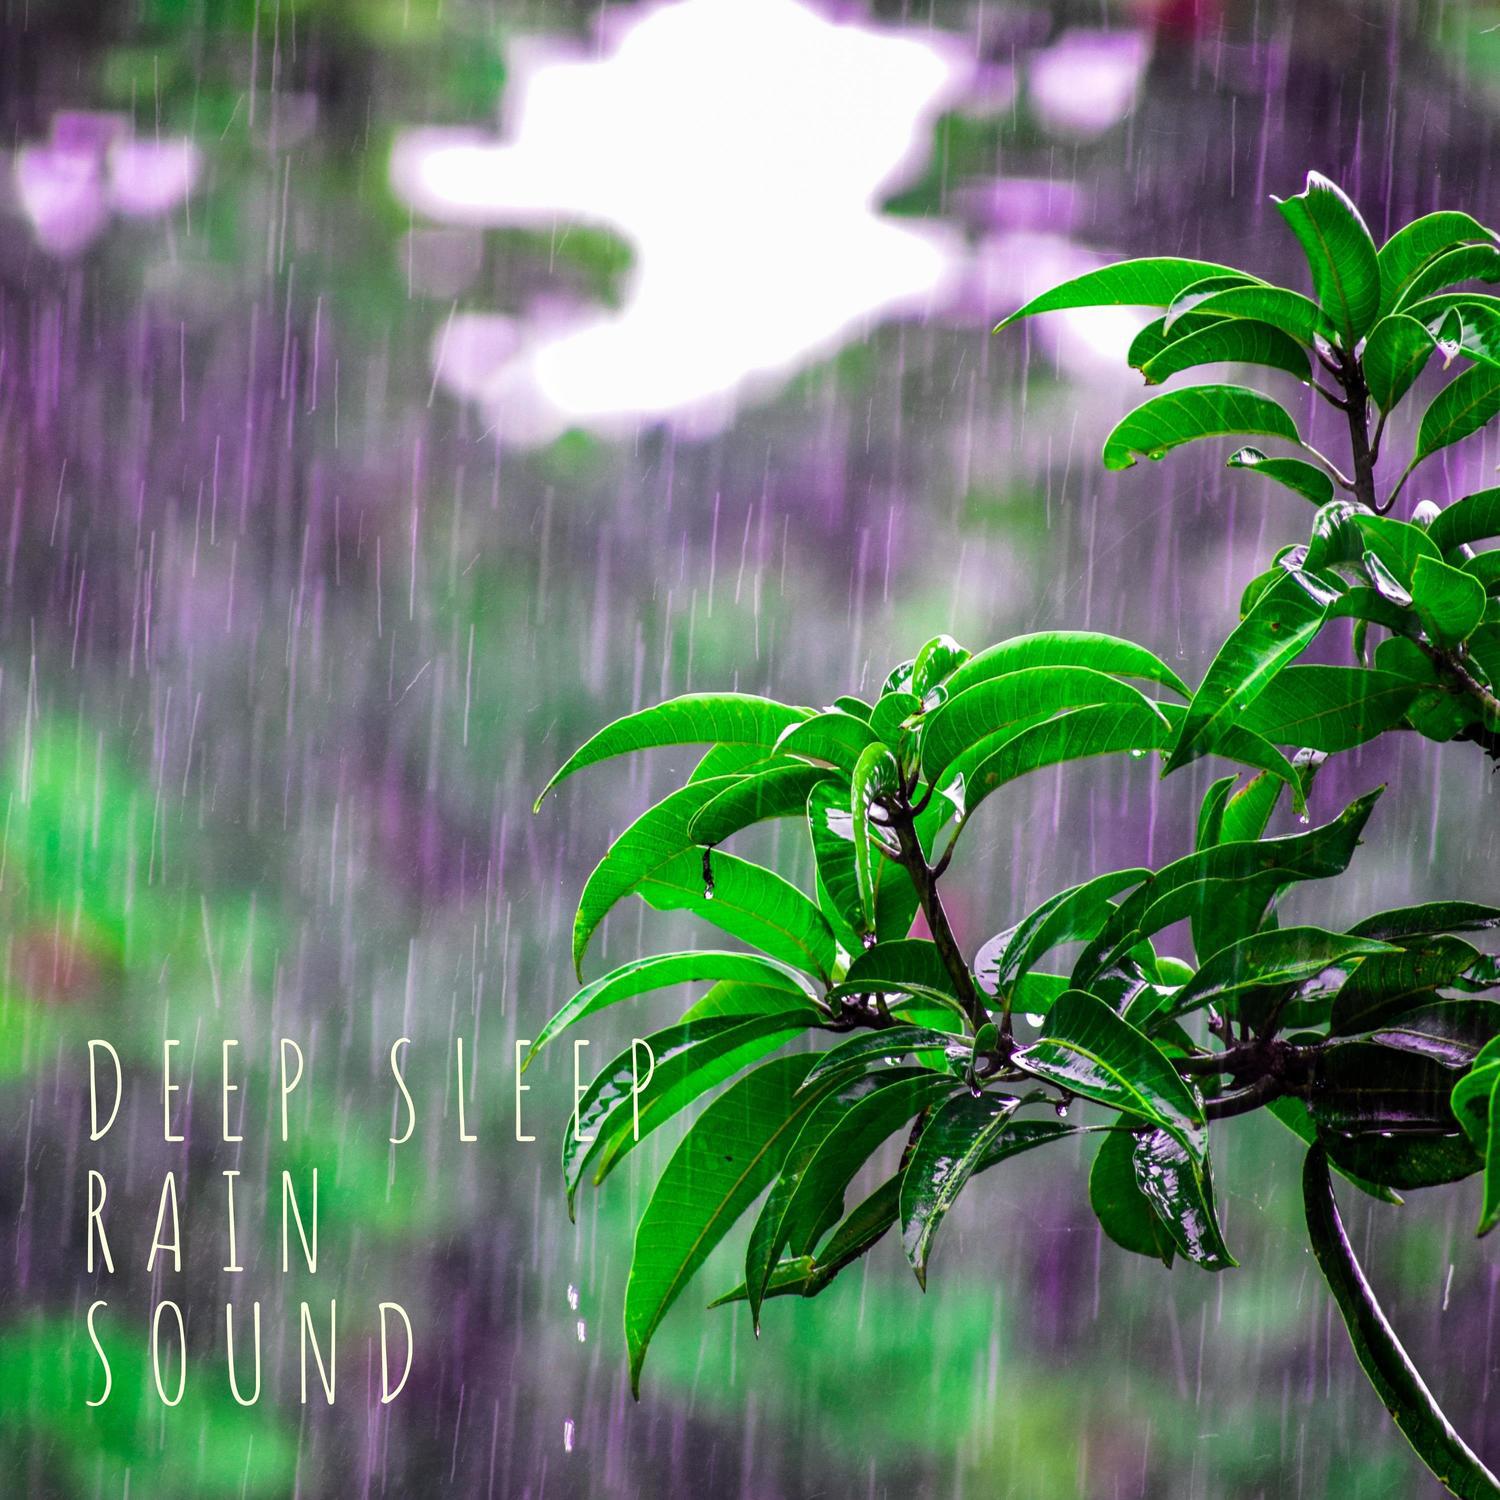 Soft and Steady Rain Sounds [Loopable]